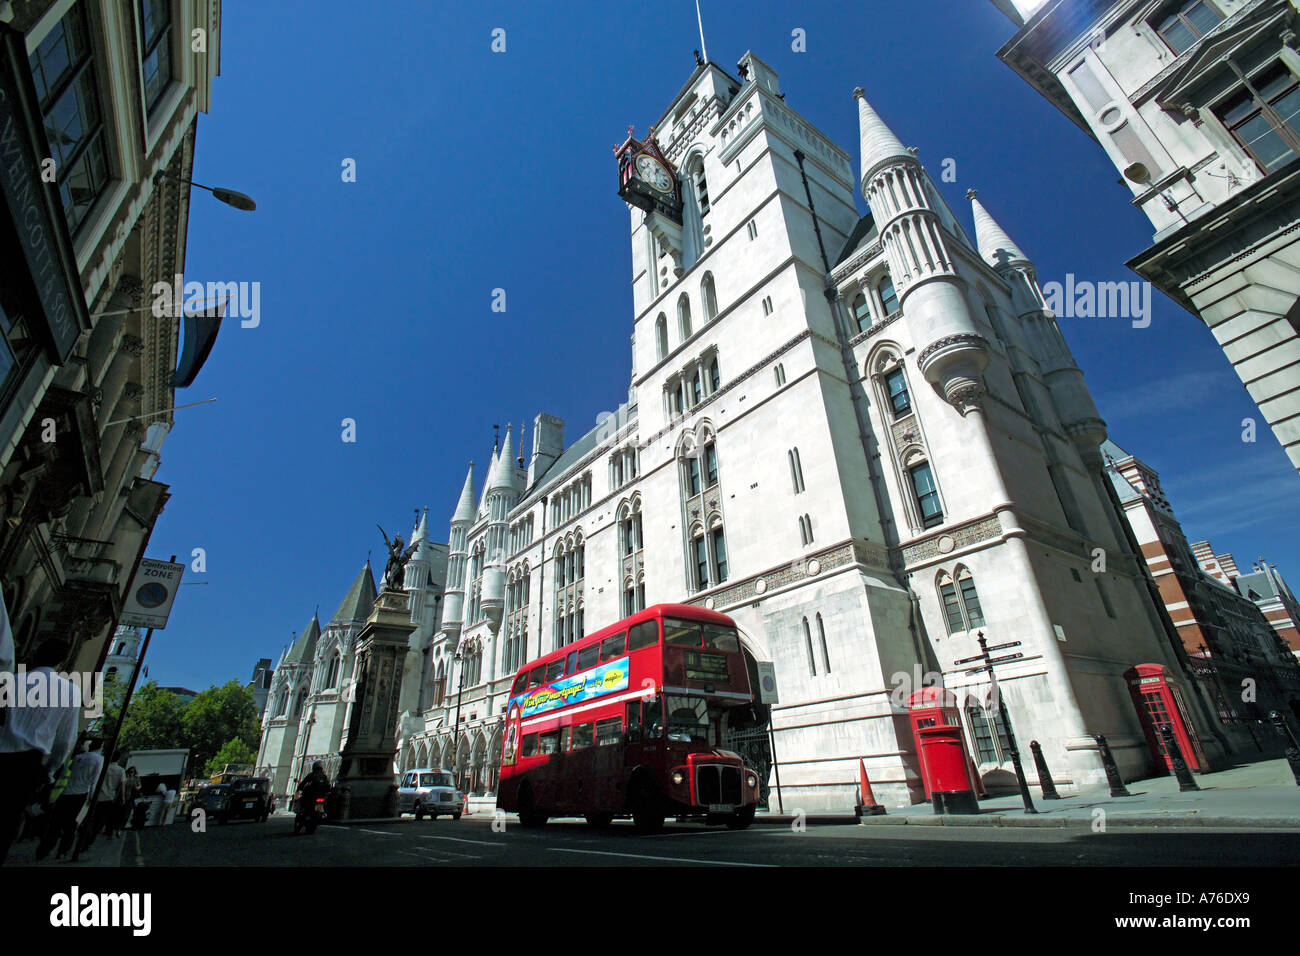 Low wide angle of a traditional red double decker route master bus passing the Royal Courts of Justice aka Law Courts in London. Stock Photo